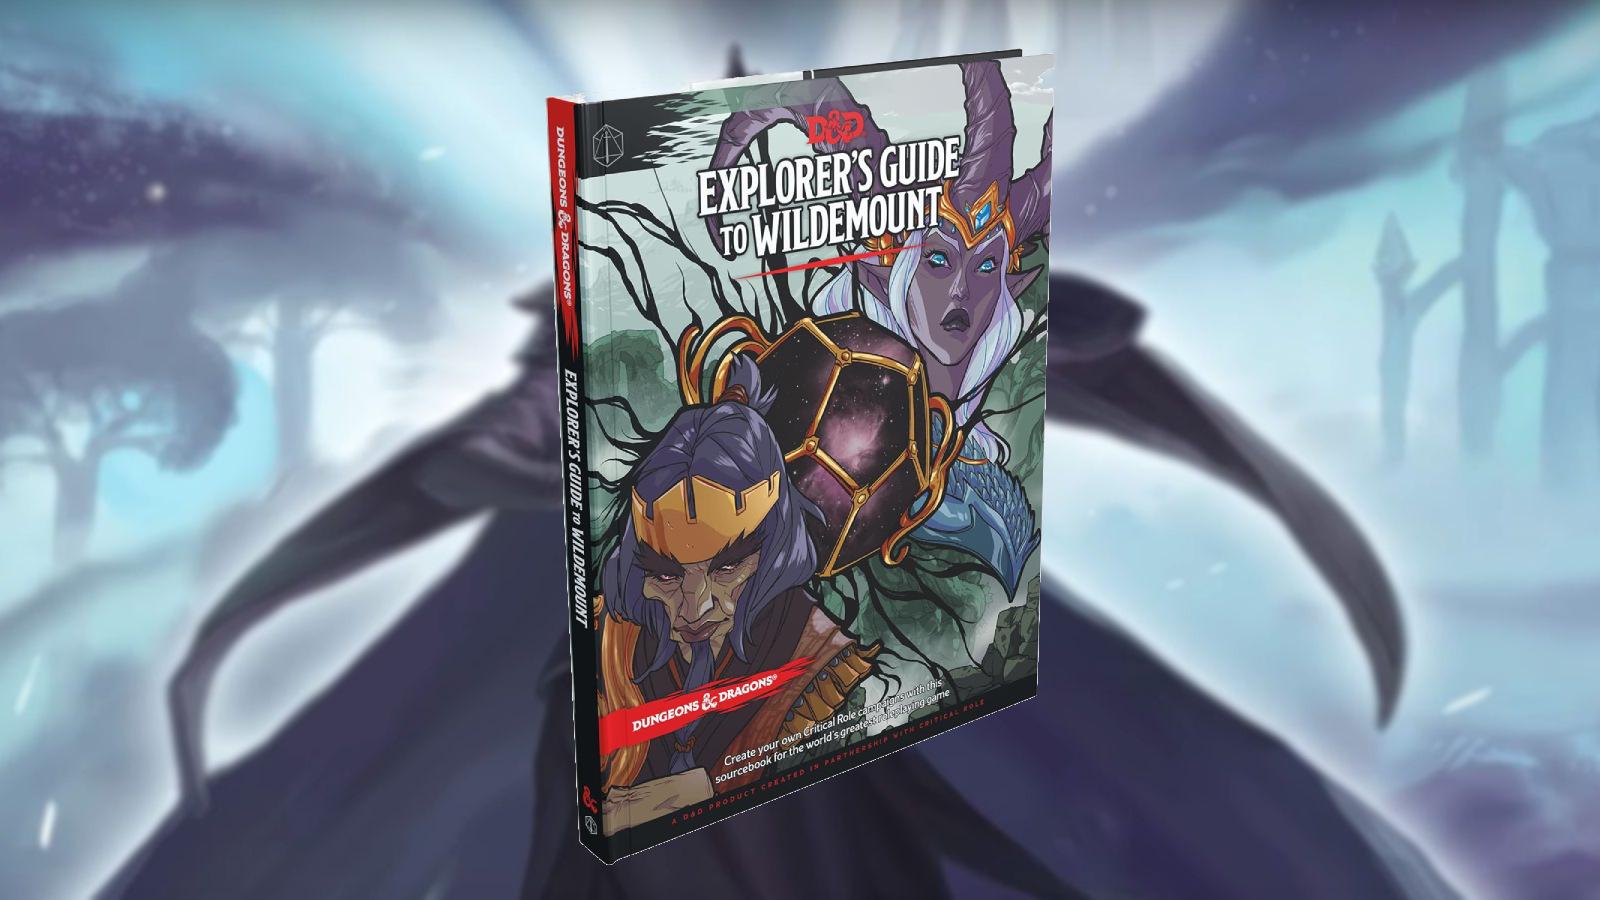 Critical Role Wildemount guide book and background